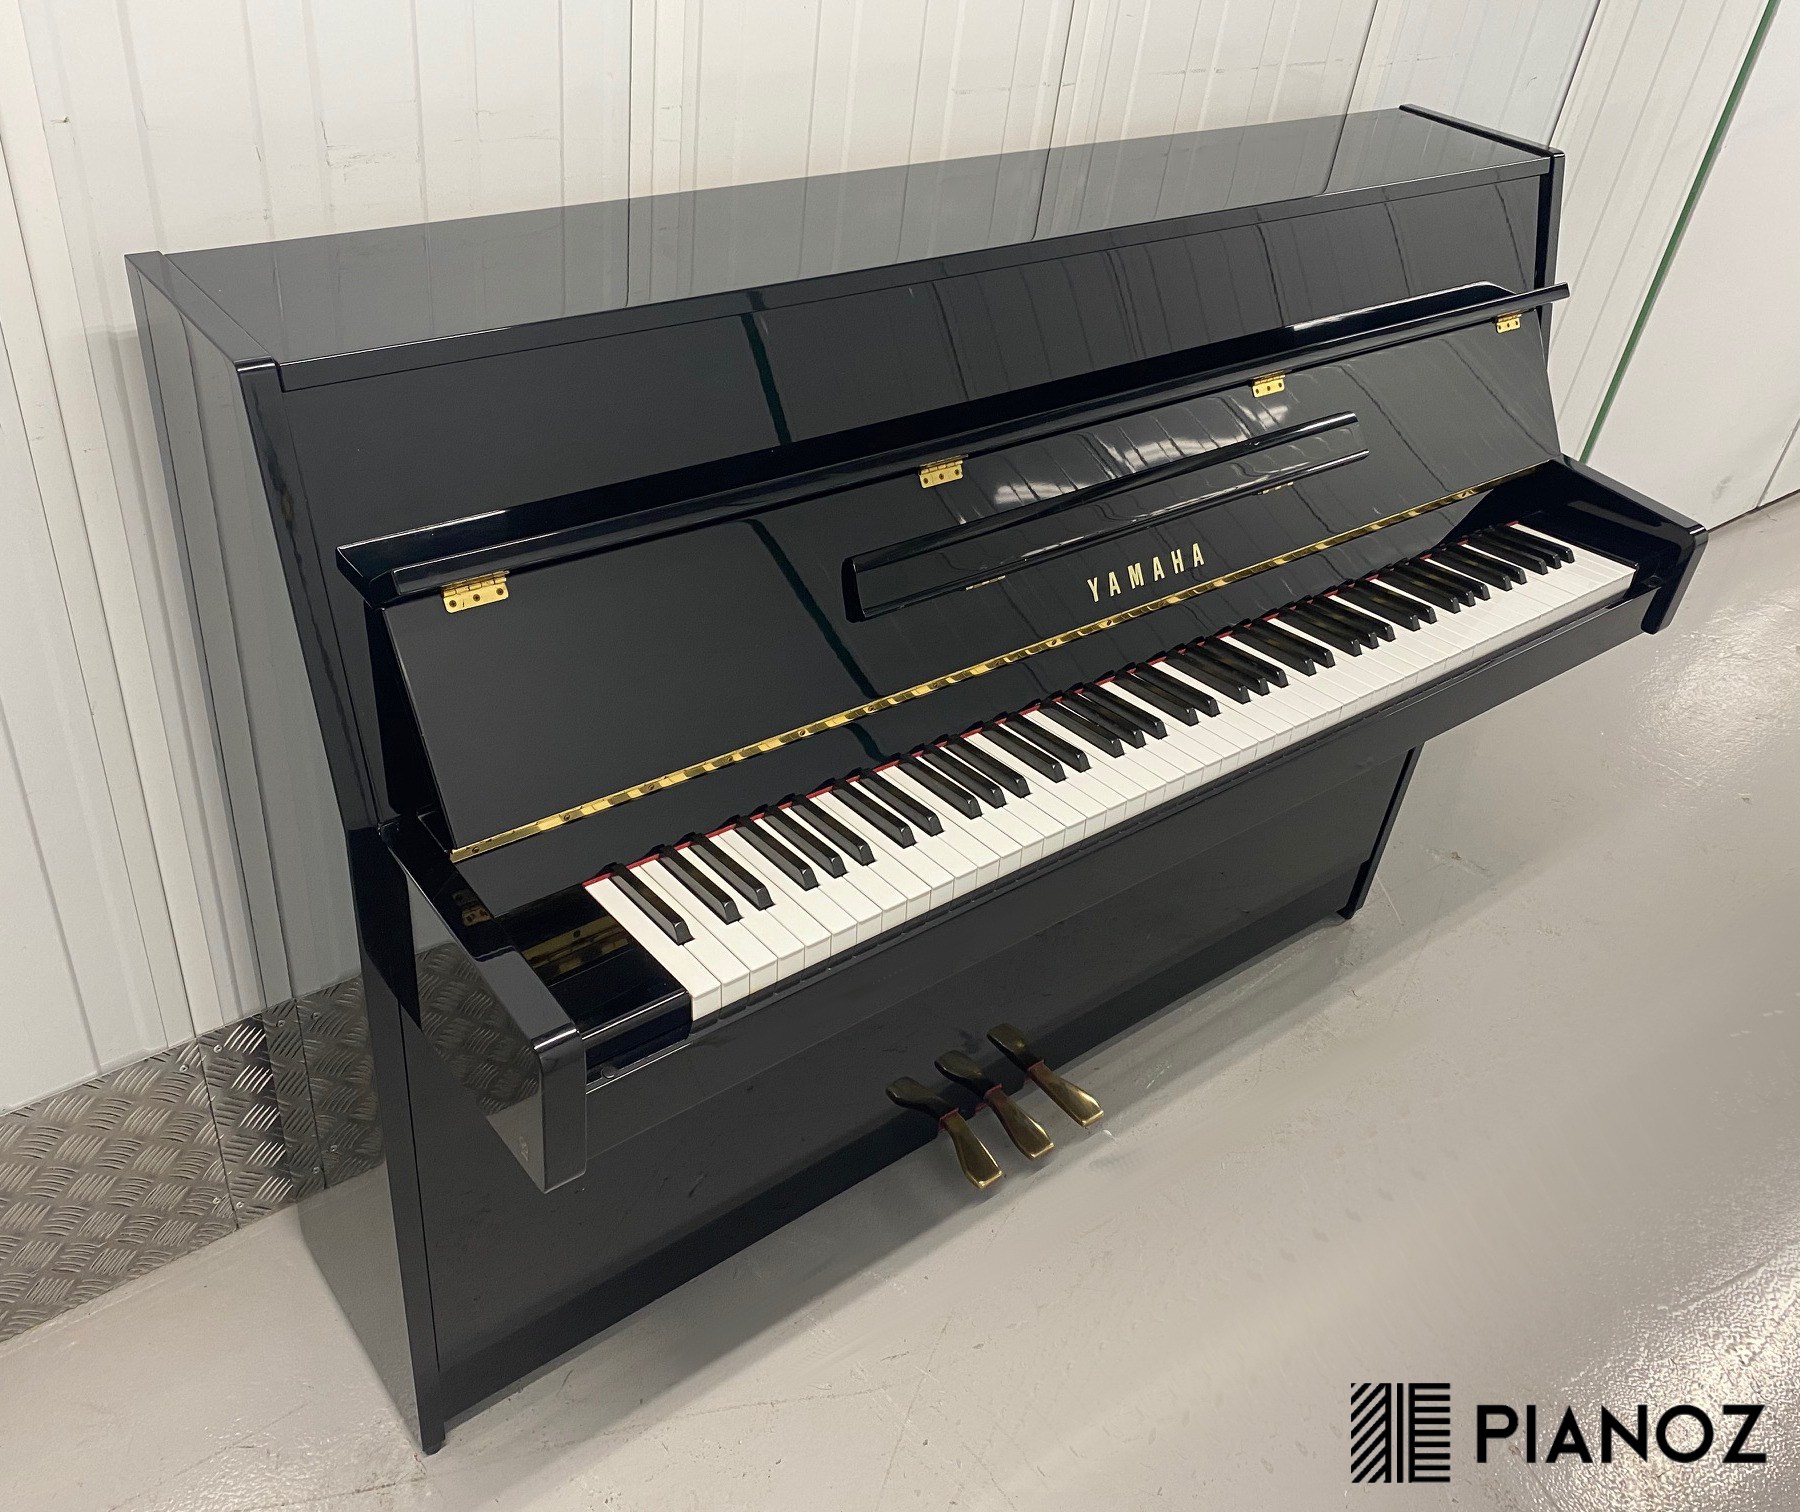 Yamaha B1 Black High Gloss Upright Piano piano for sale in UK